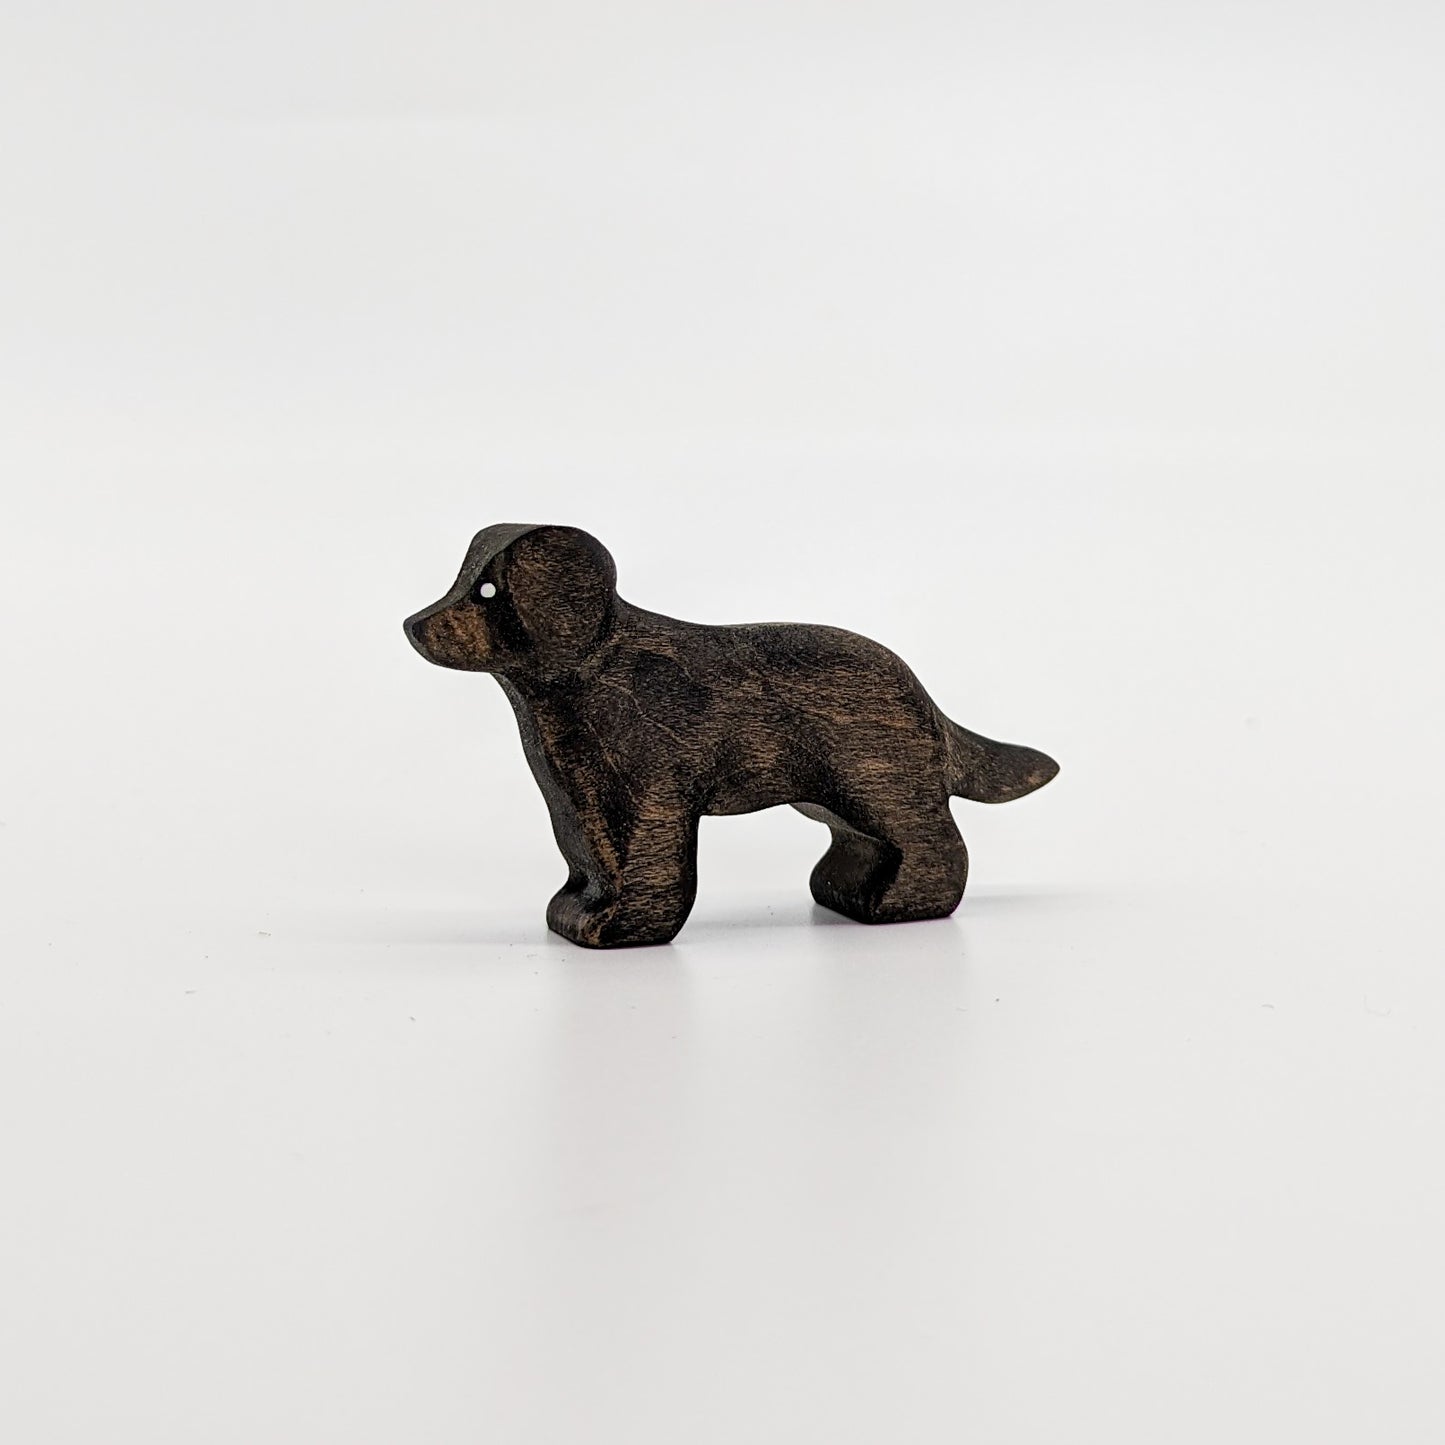 Puppy Standing Wooden Toy